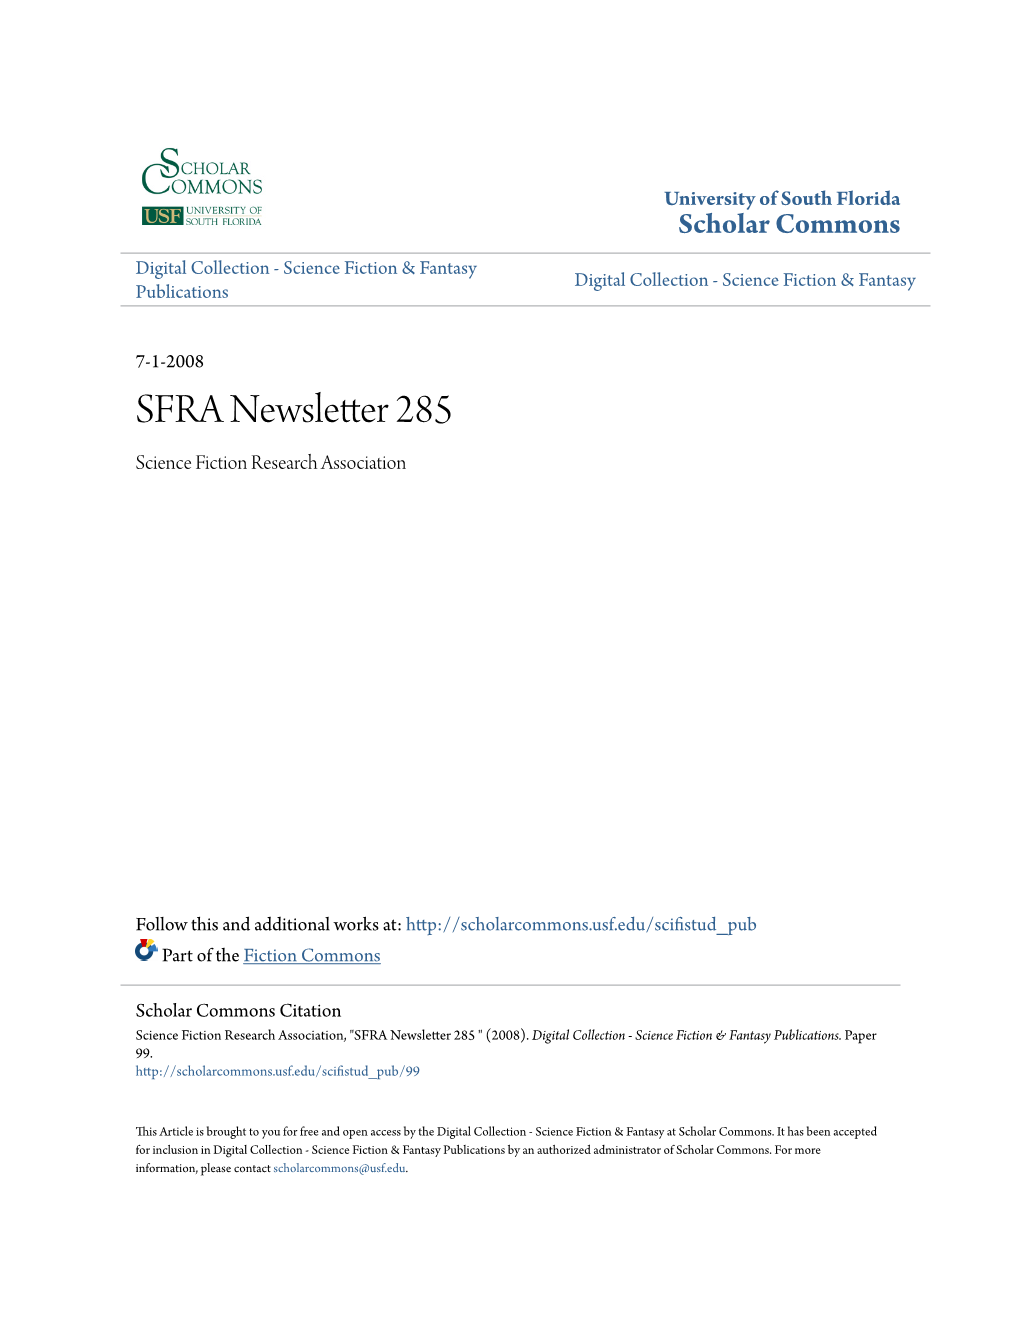 SFRA Newsletter and SFRA Wiil Be Advertised, but Karen Hellekson Will Serve in Review